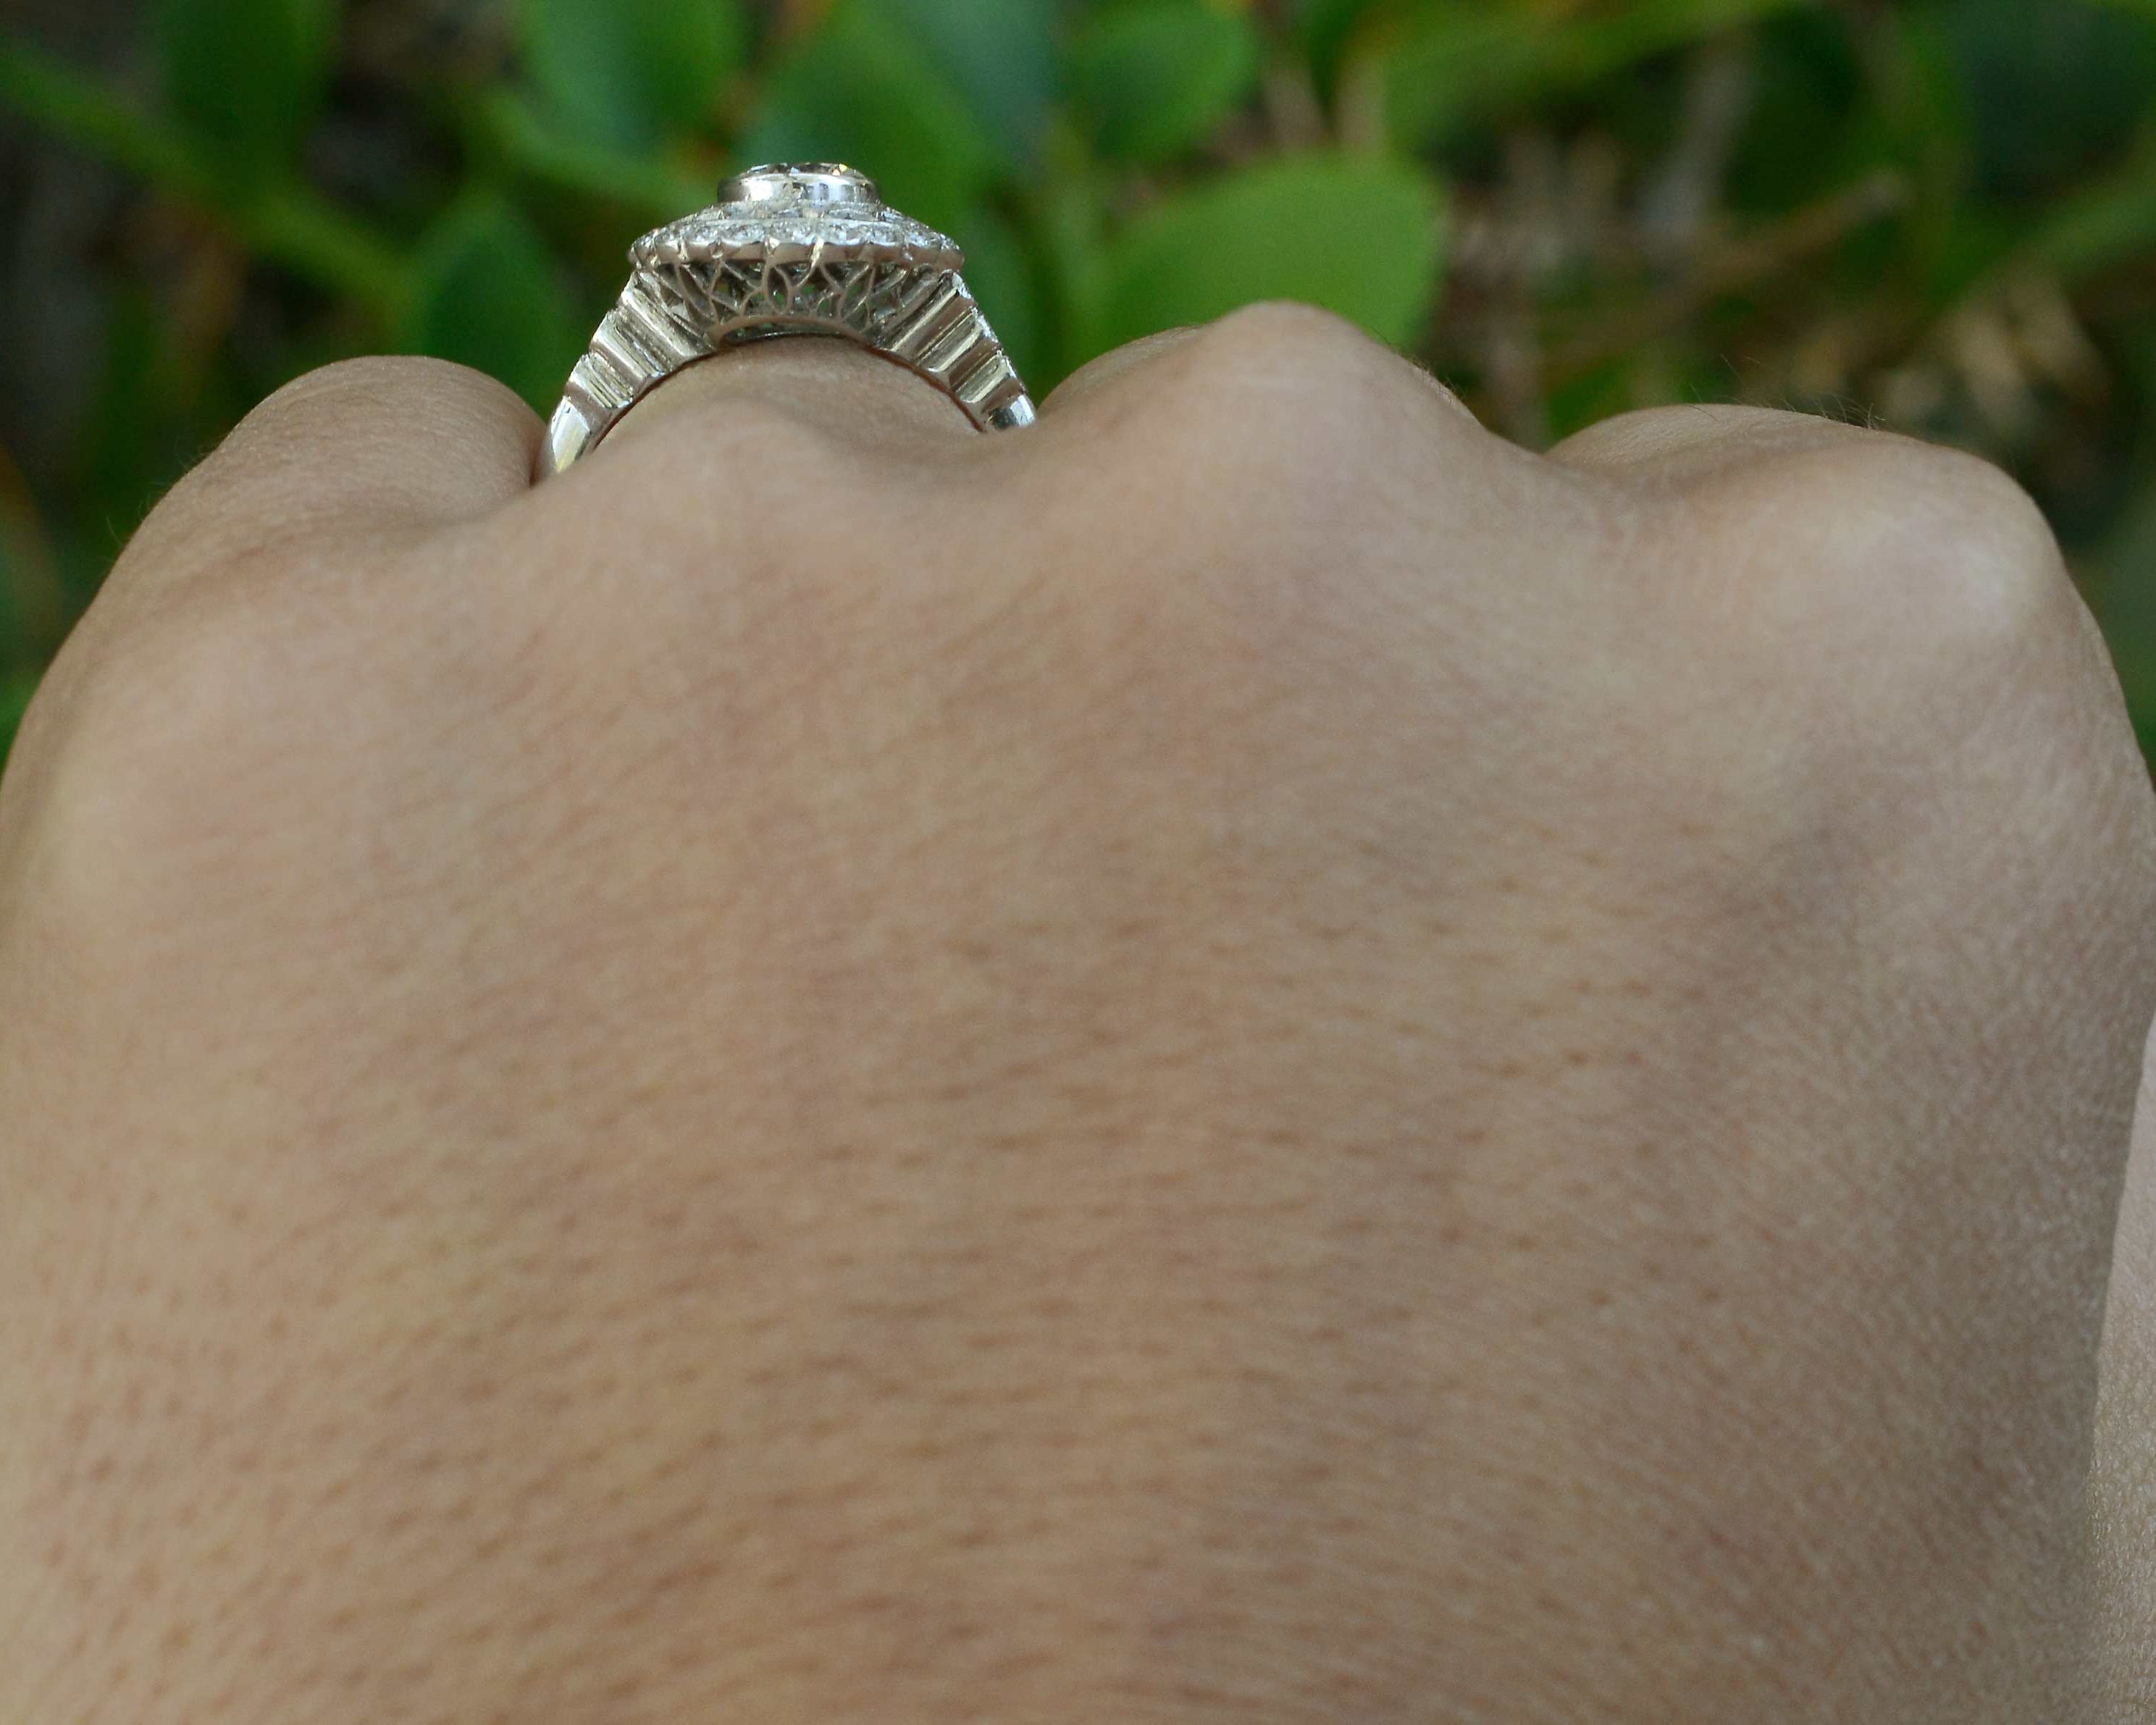 Webbed filigree and stepped tapered diamond band.